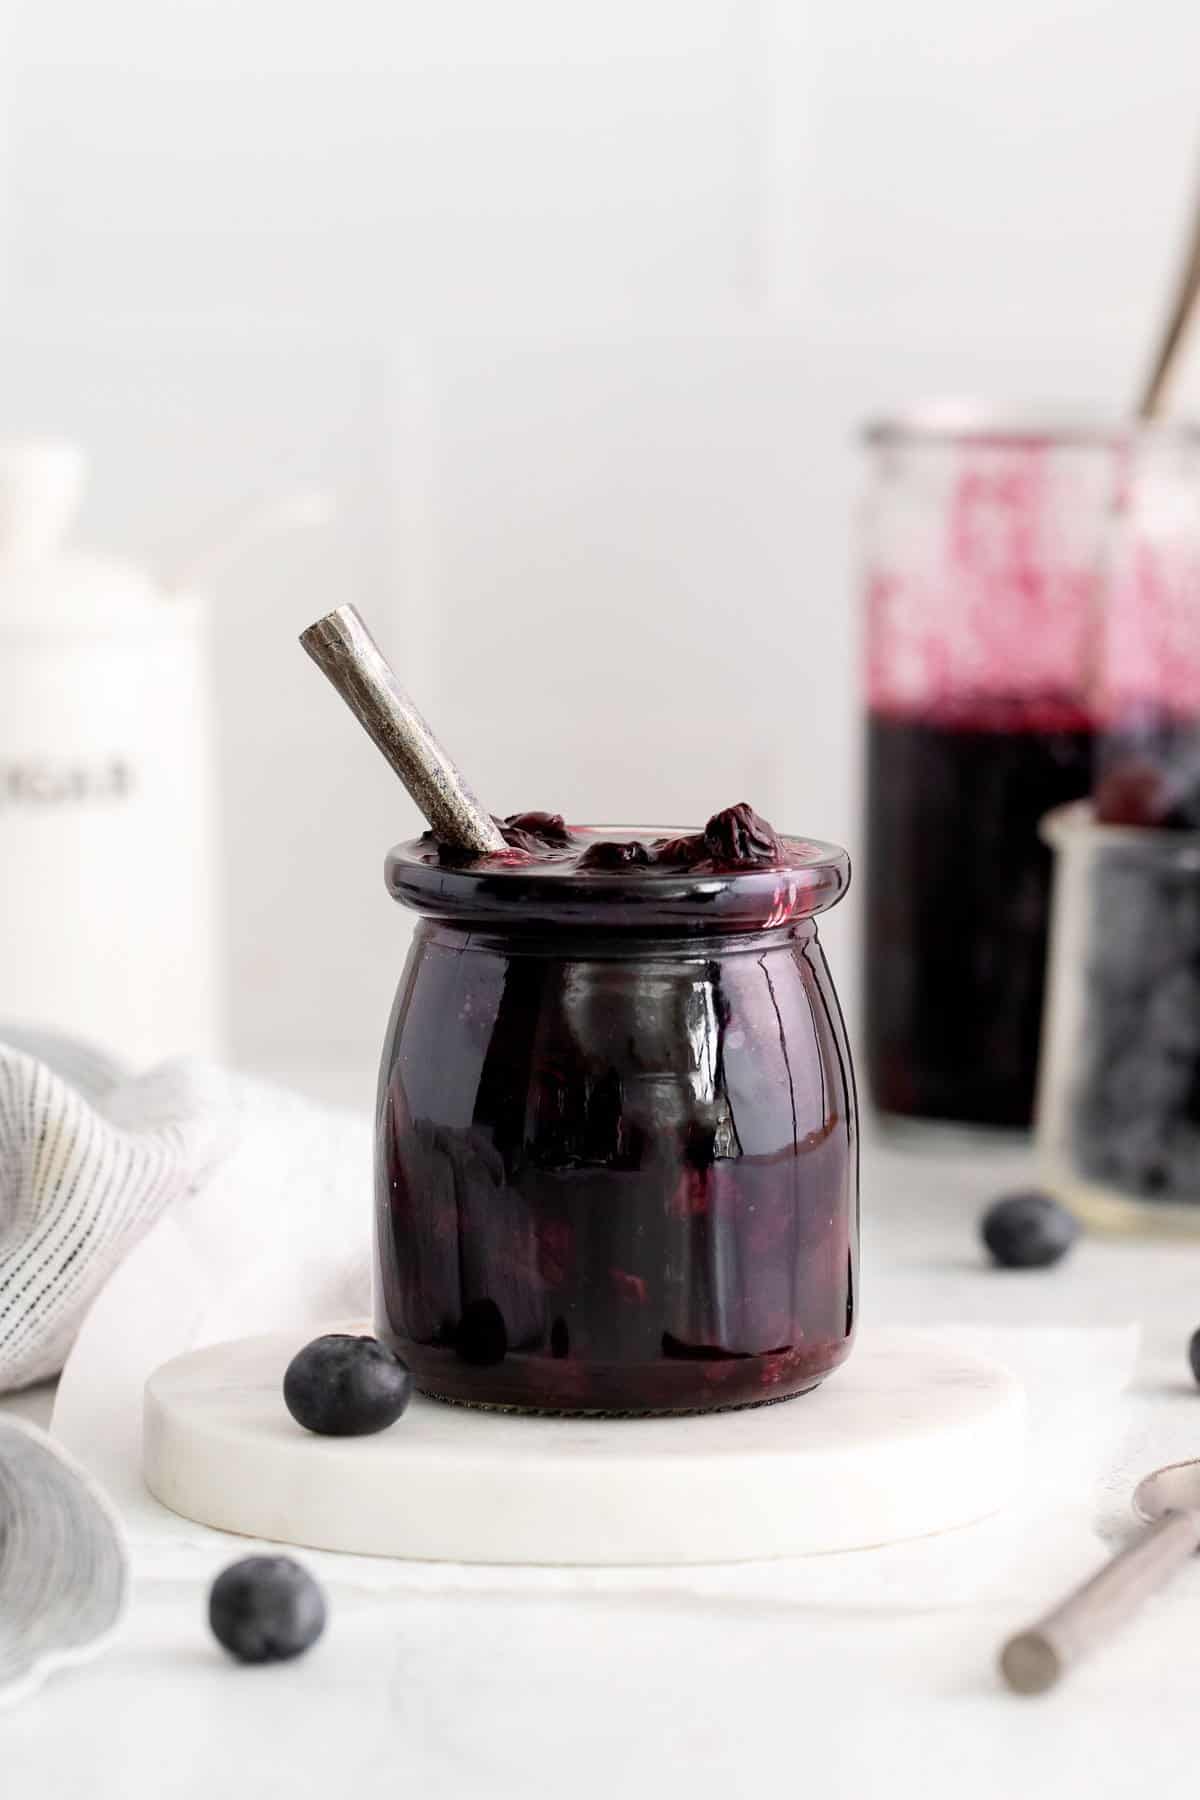 Blueberry compote in a jar, surrounded by cooking supplies